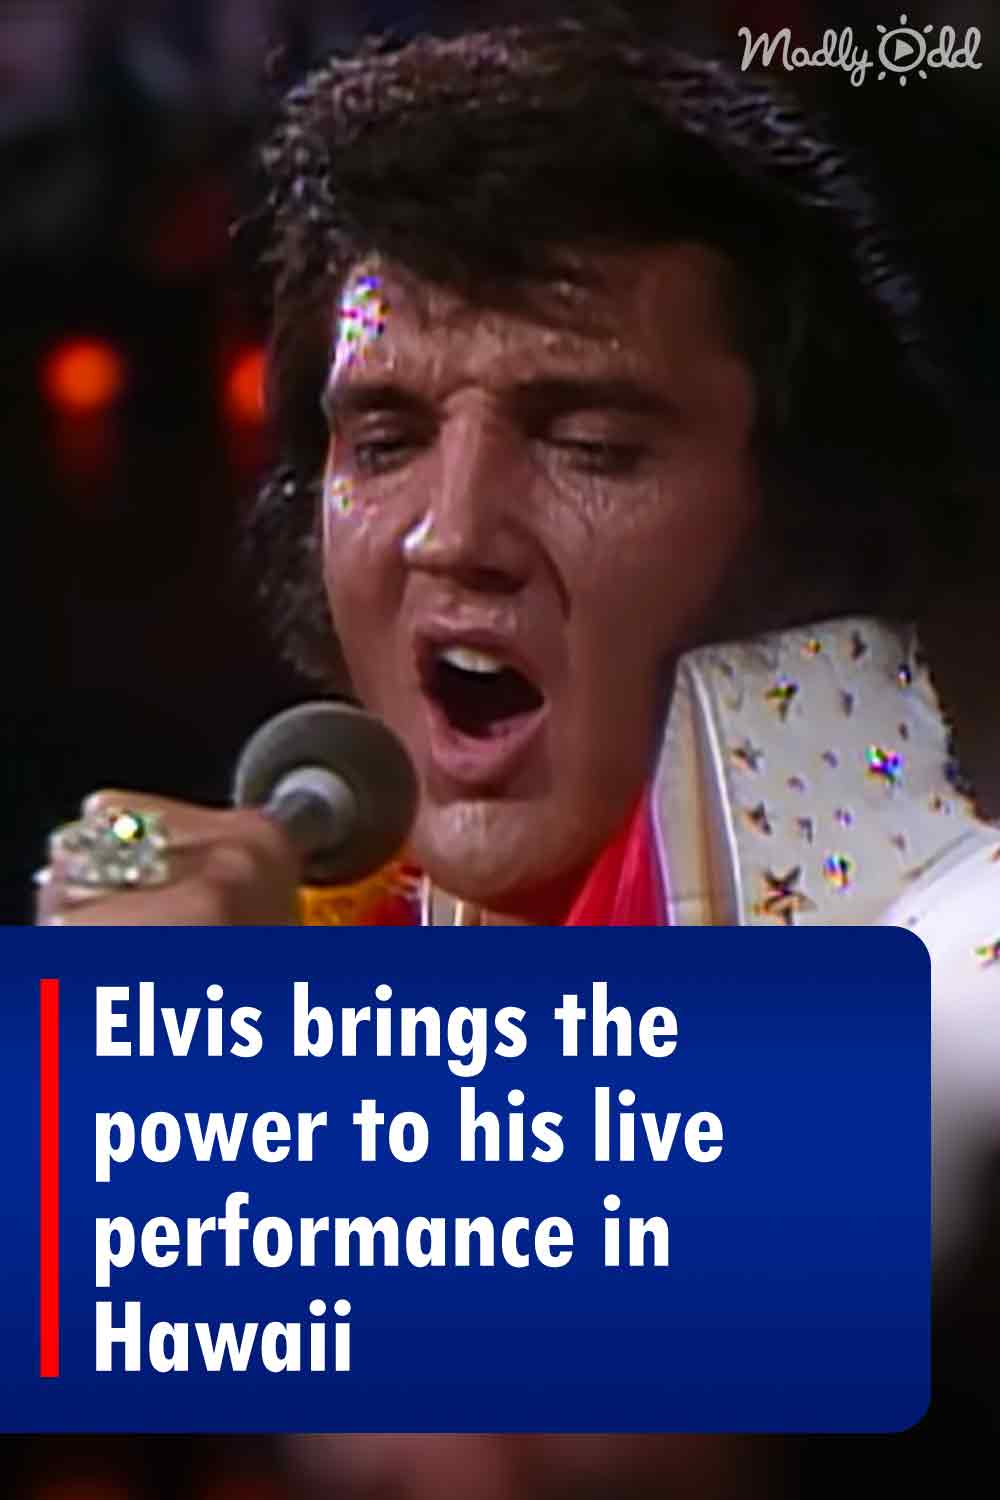 Elvis brings the power to his live performance in Hawaii